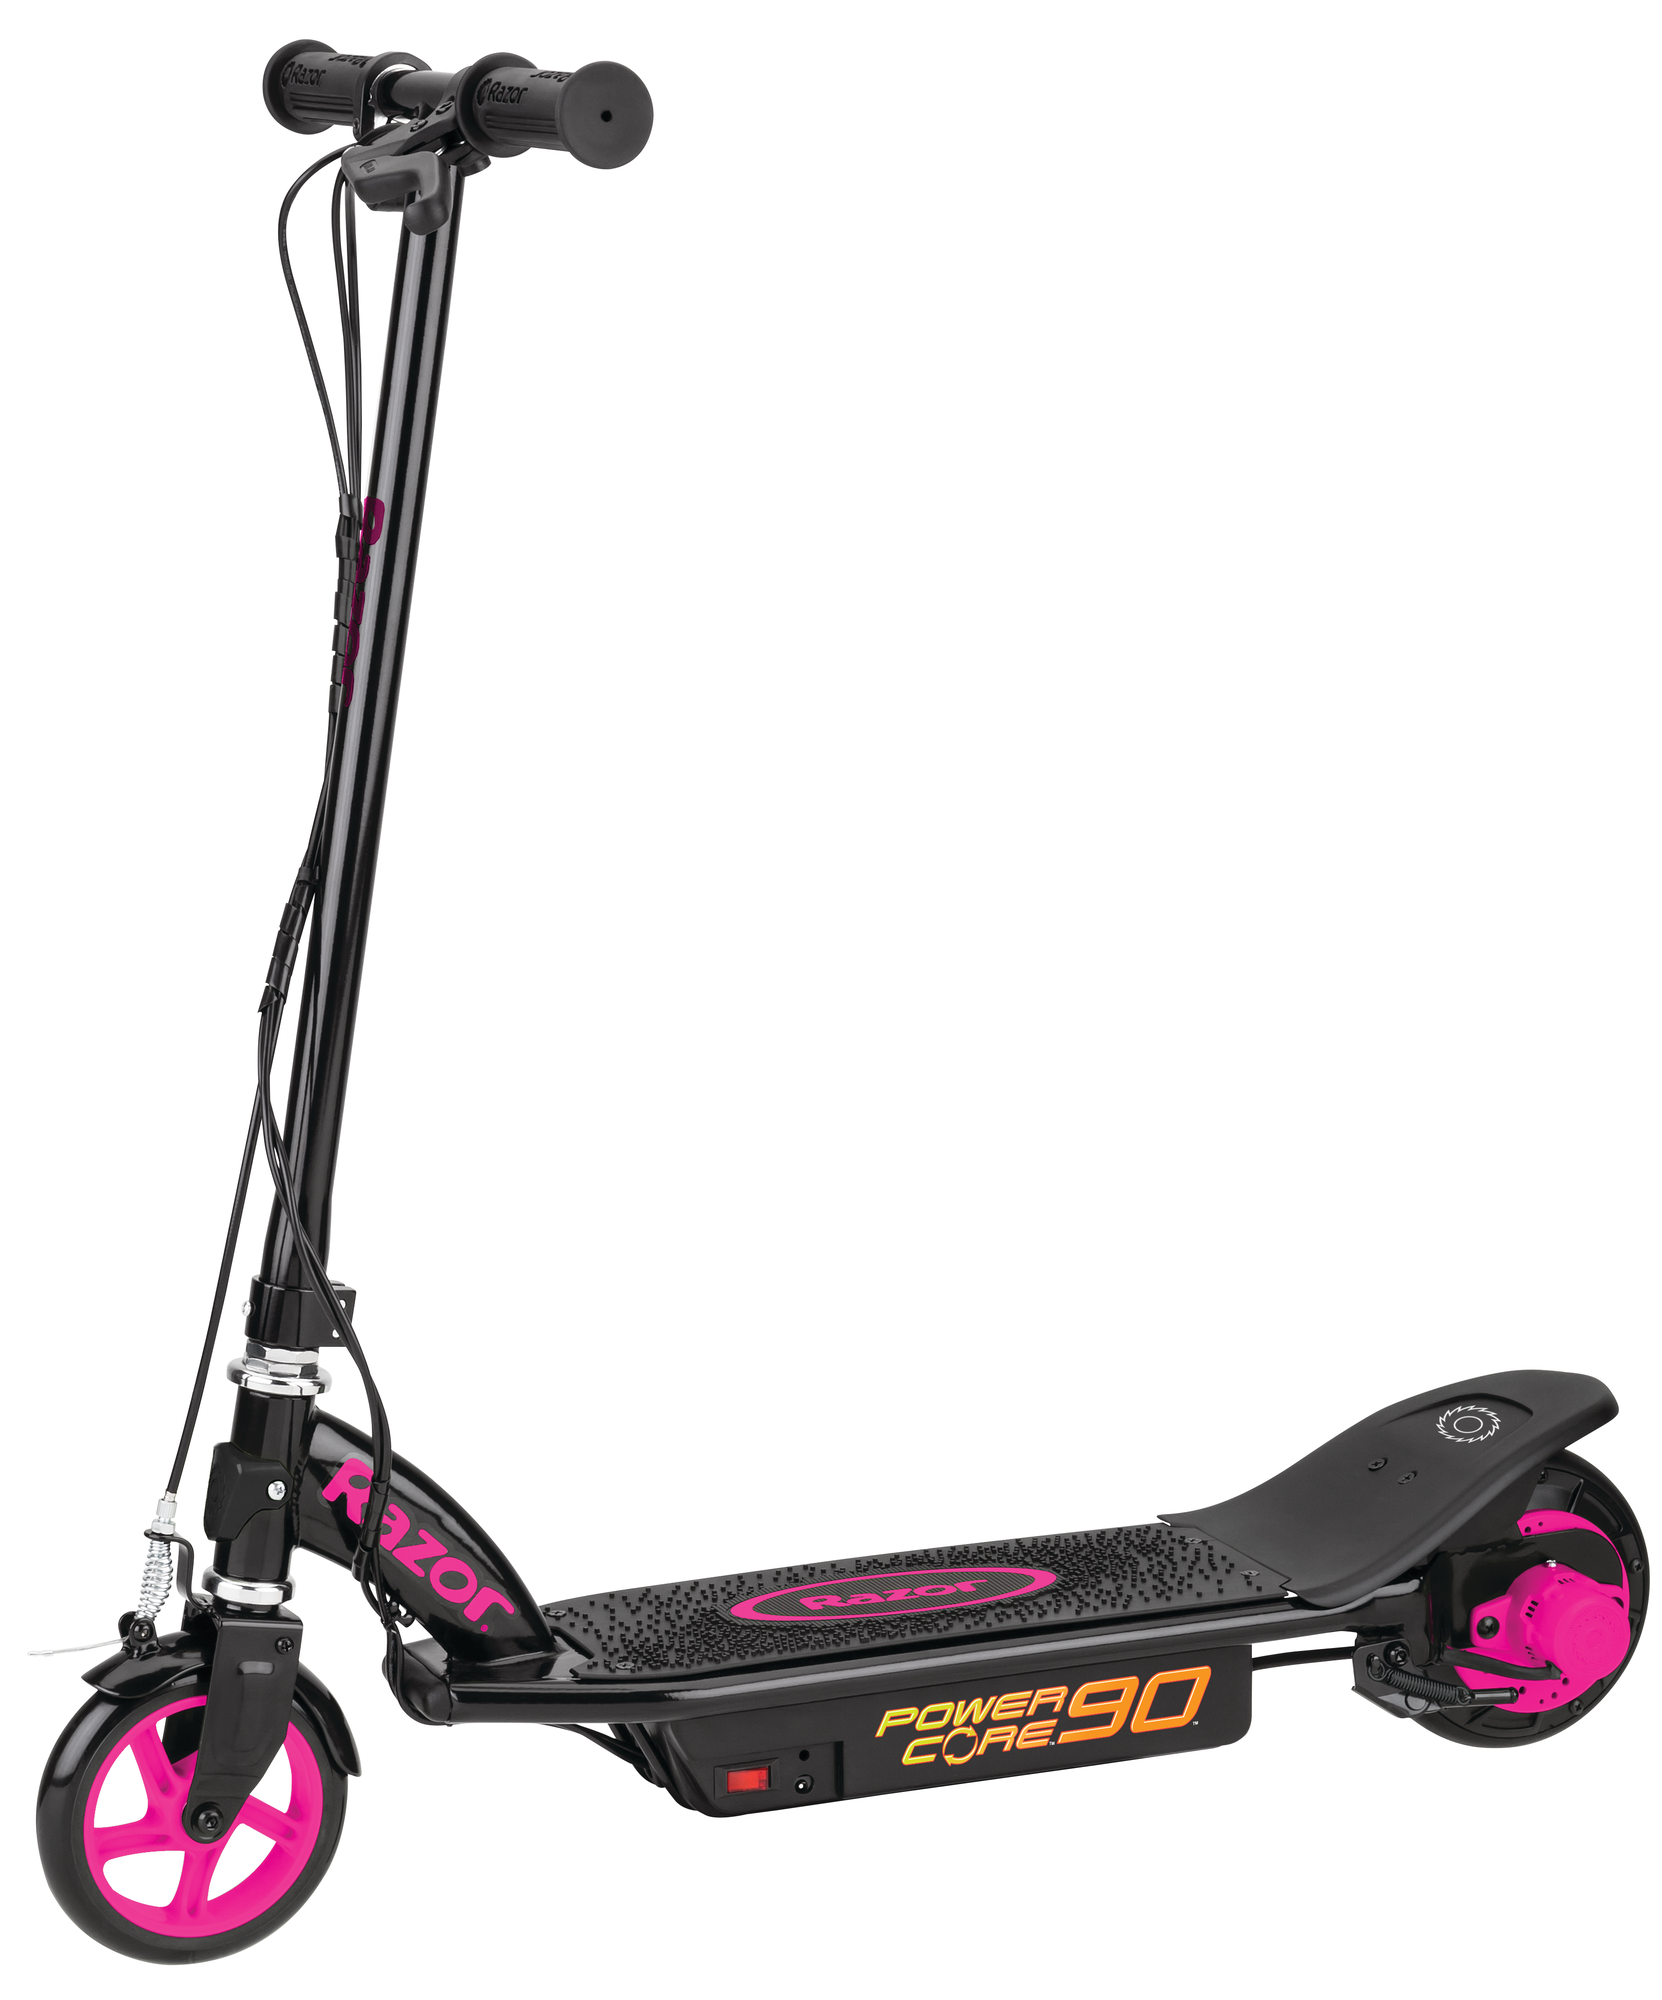 best 400cc scooter